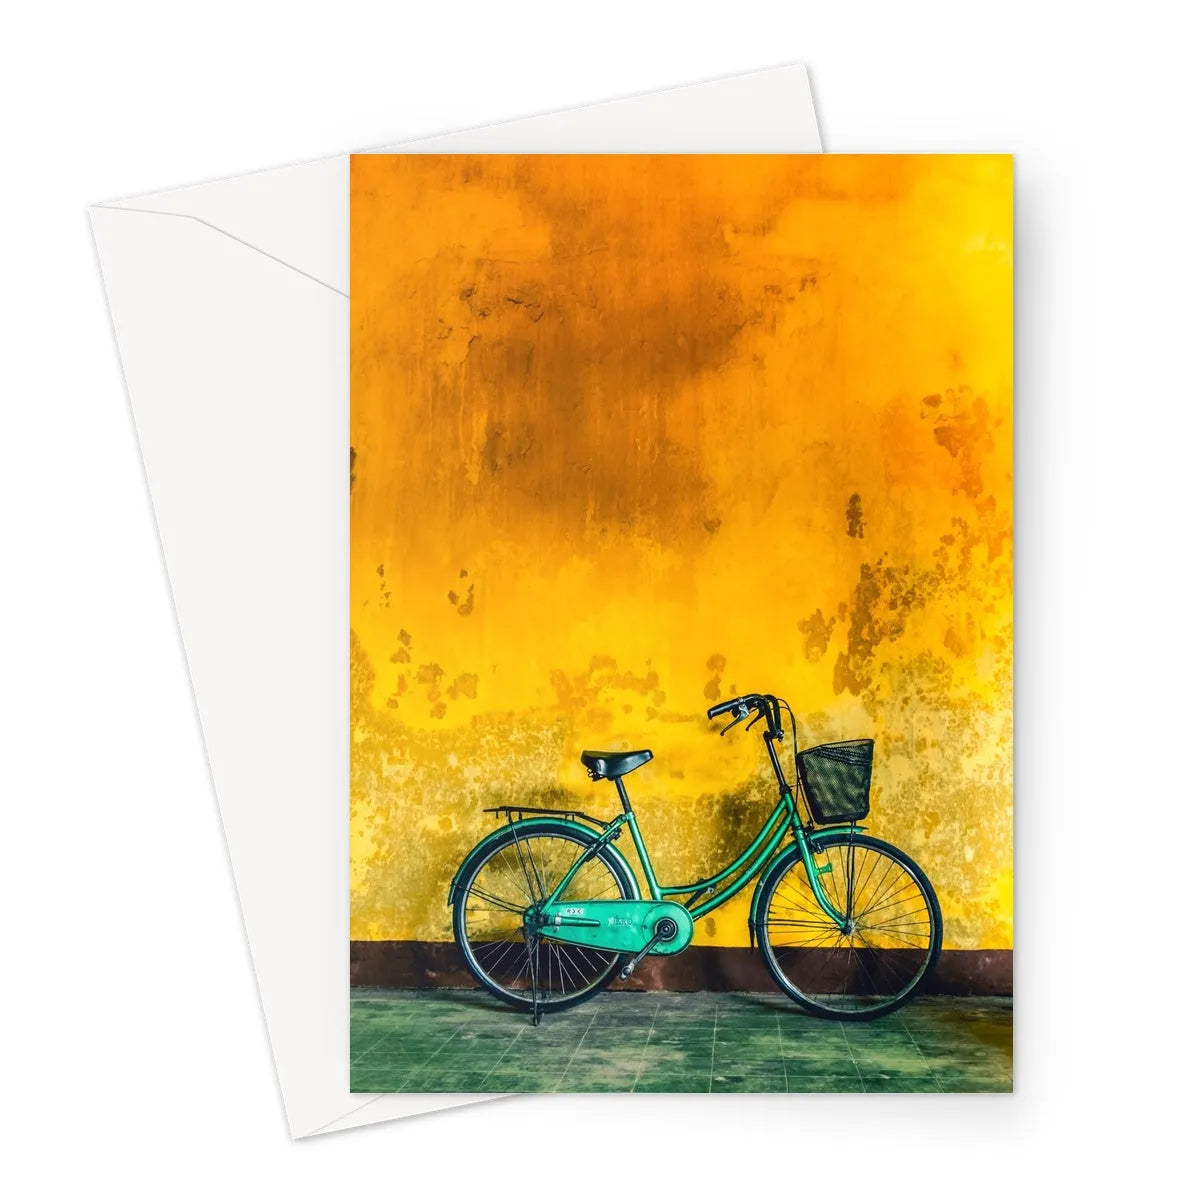 Lemon Lime - Hoi An Vietnam Bicycle Art Greeting Card - A5 Portrait / 1 Card - Greeting & Note Cards - Aesthetic Art